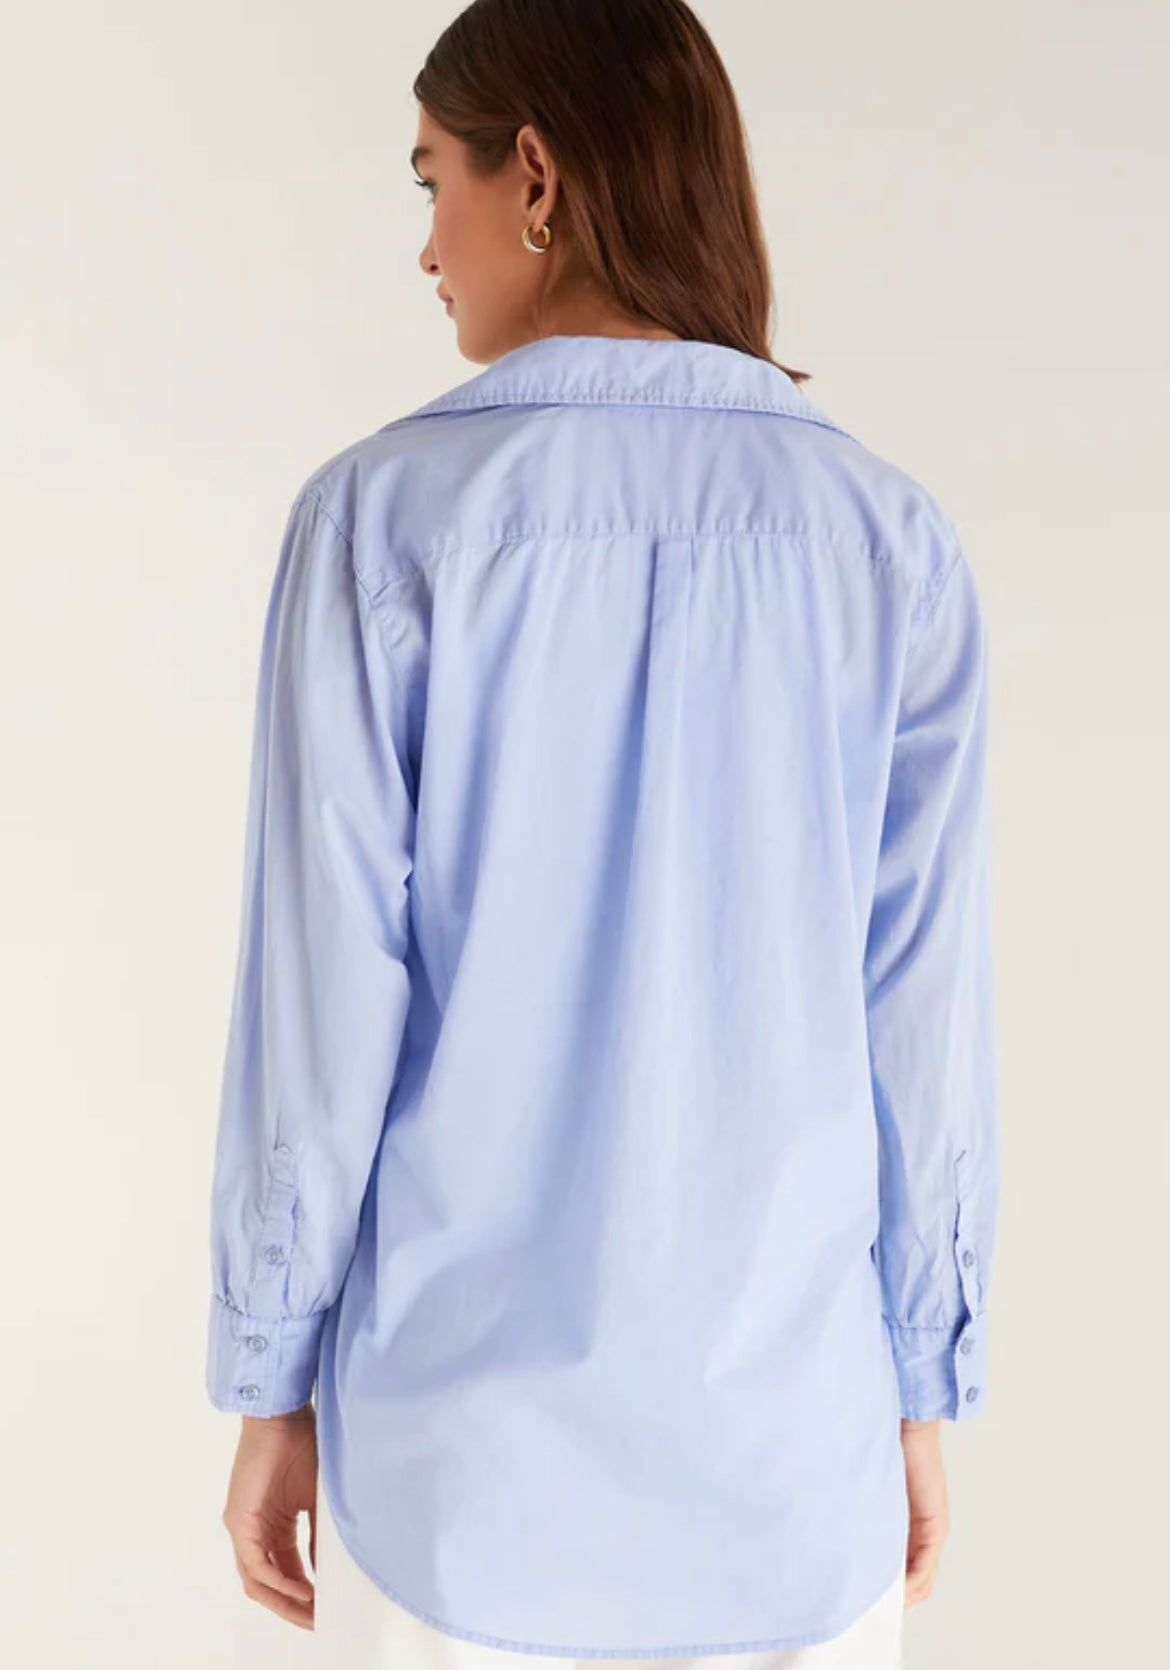 Z Supply POOLSIDE BUTTON UP SHIRT